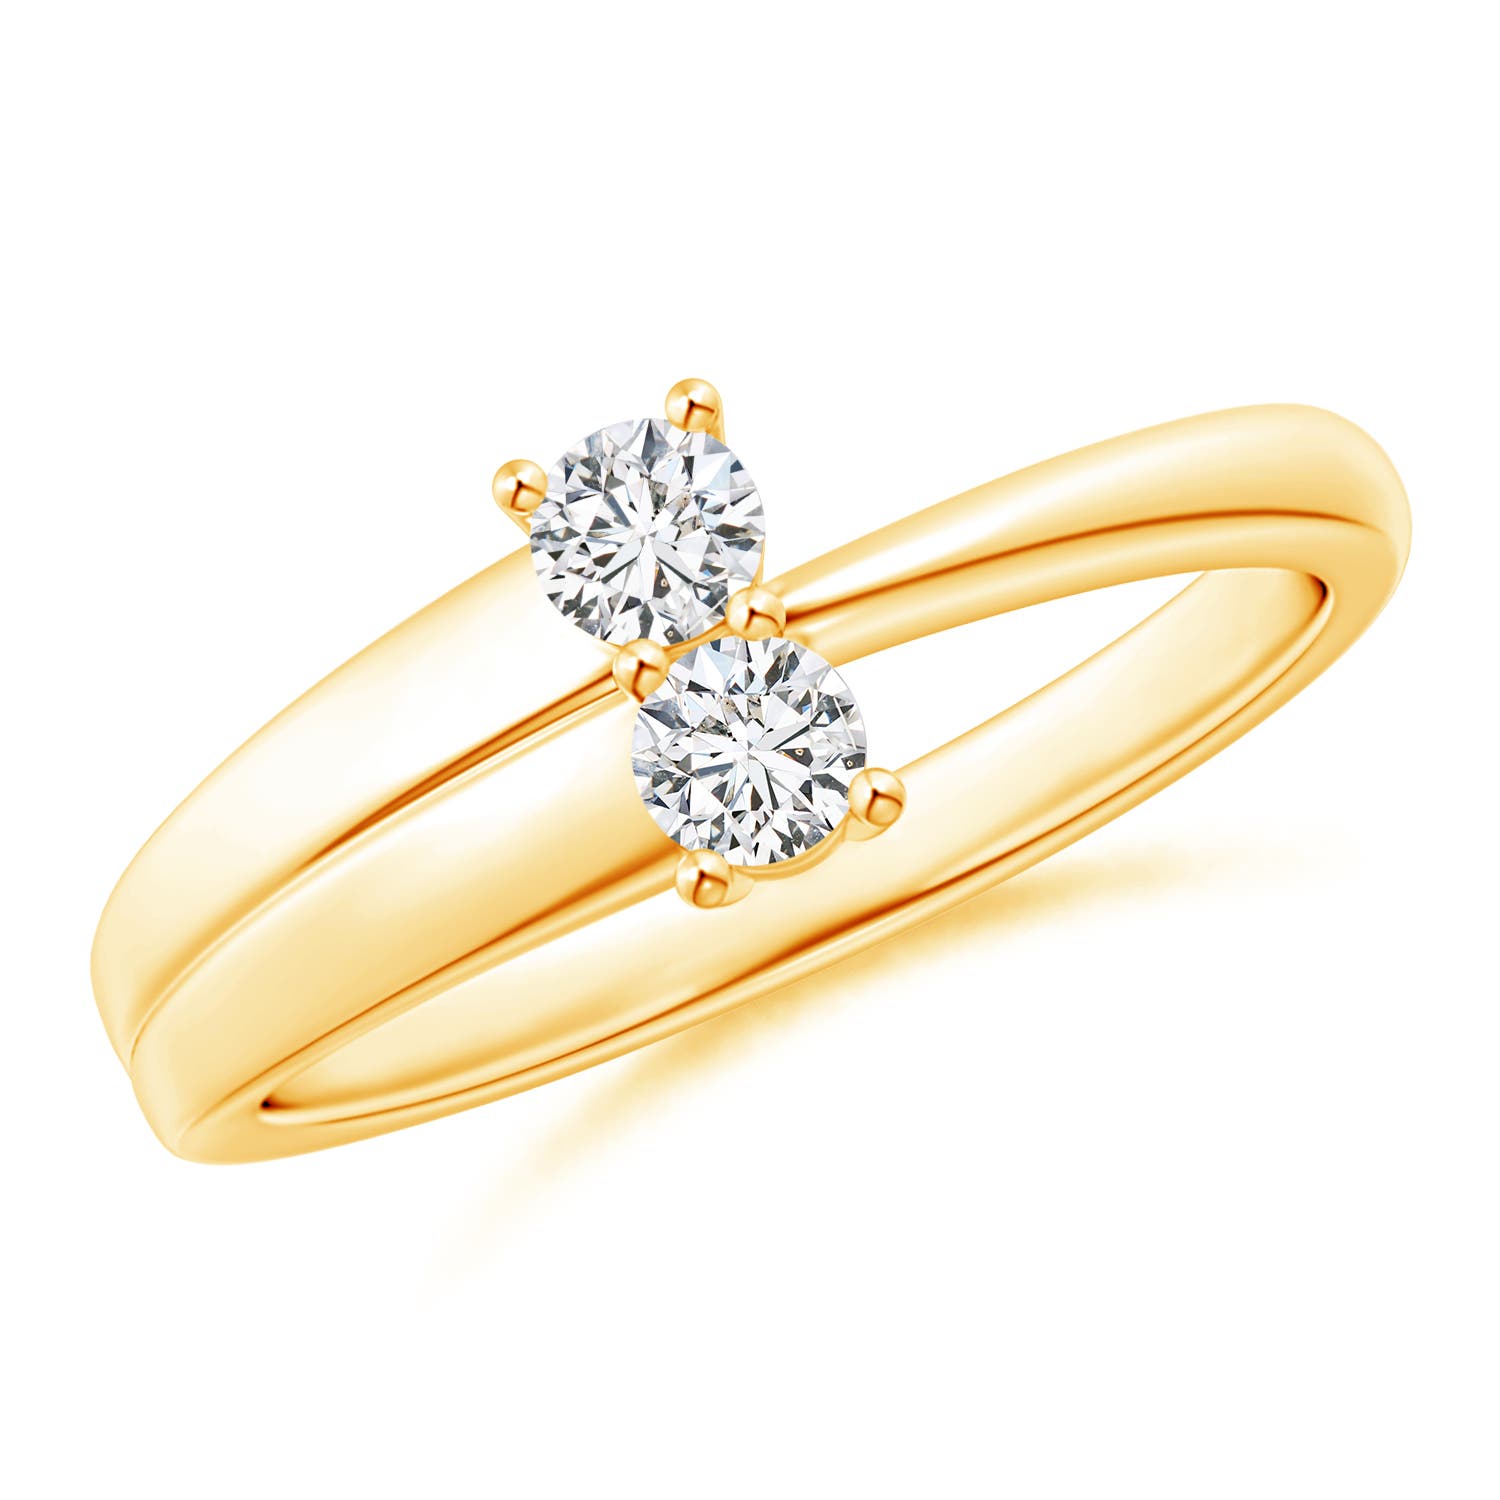 H, SI2 / 0.25 CT / 14 KT Yellow Gold